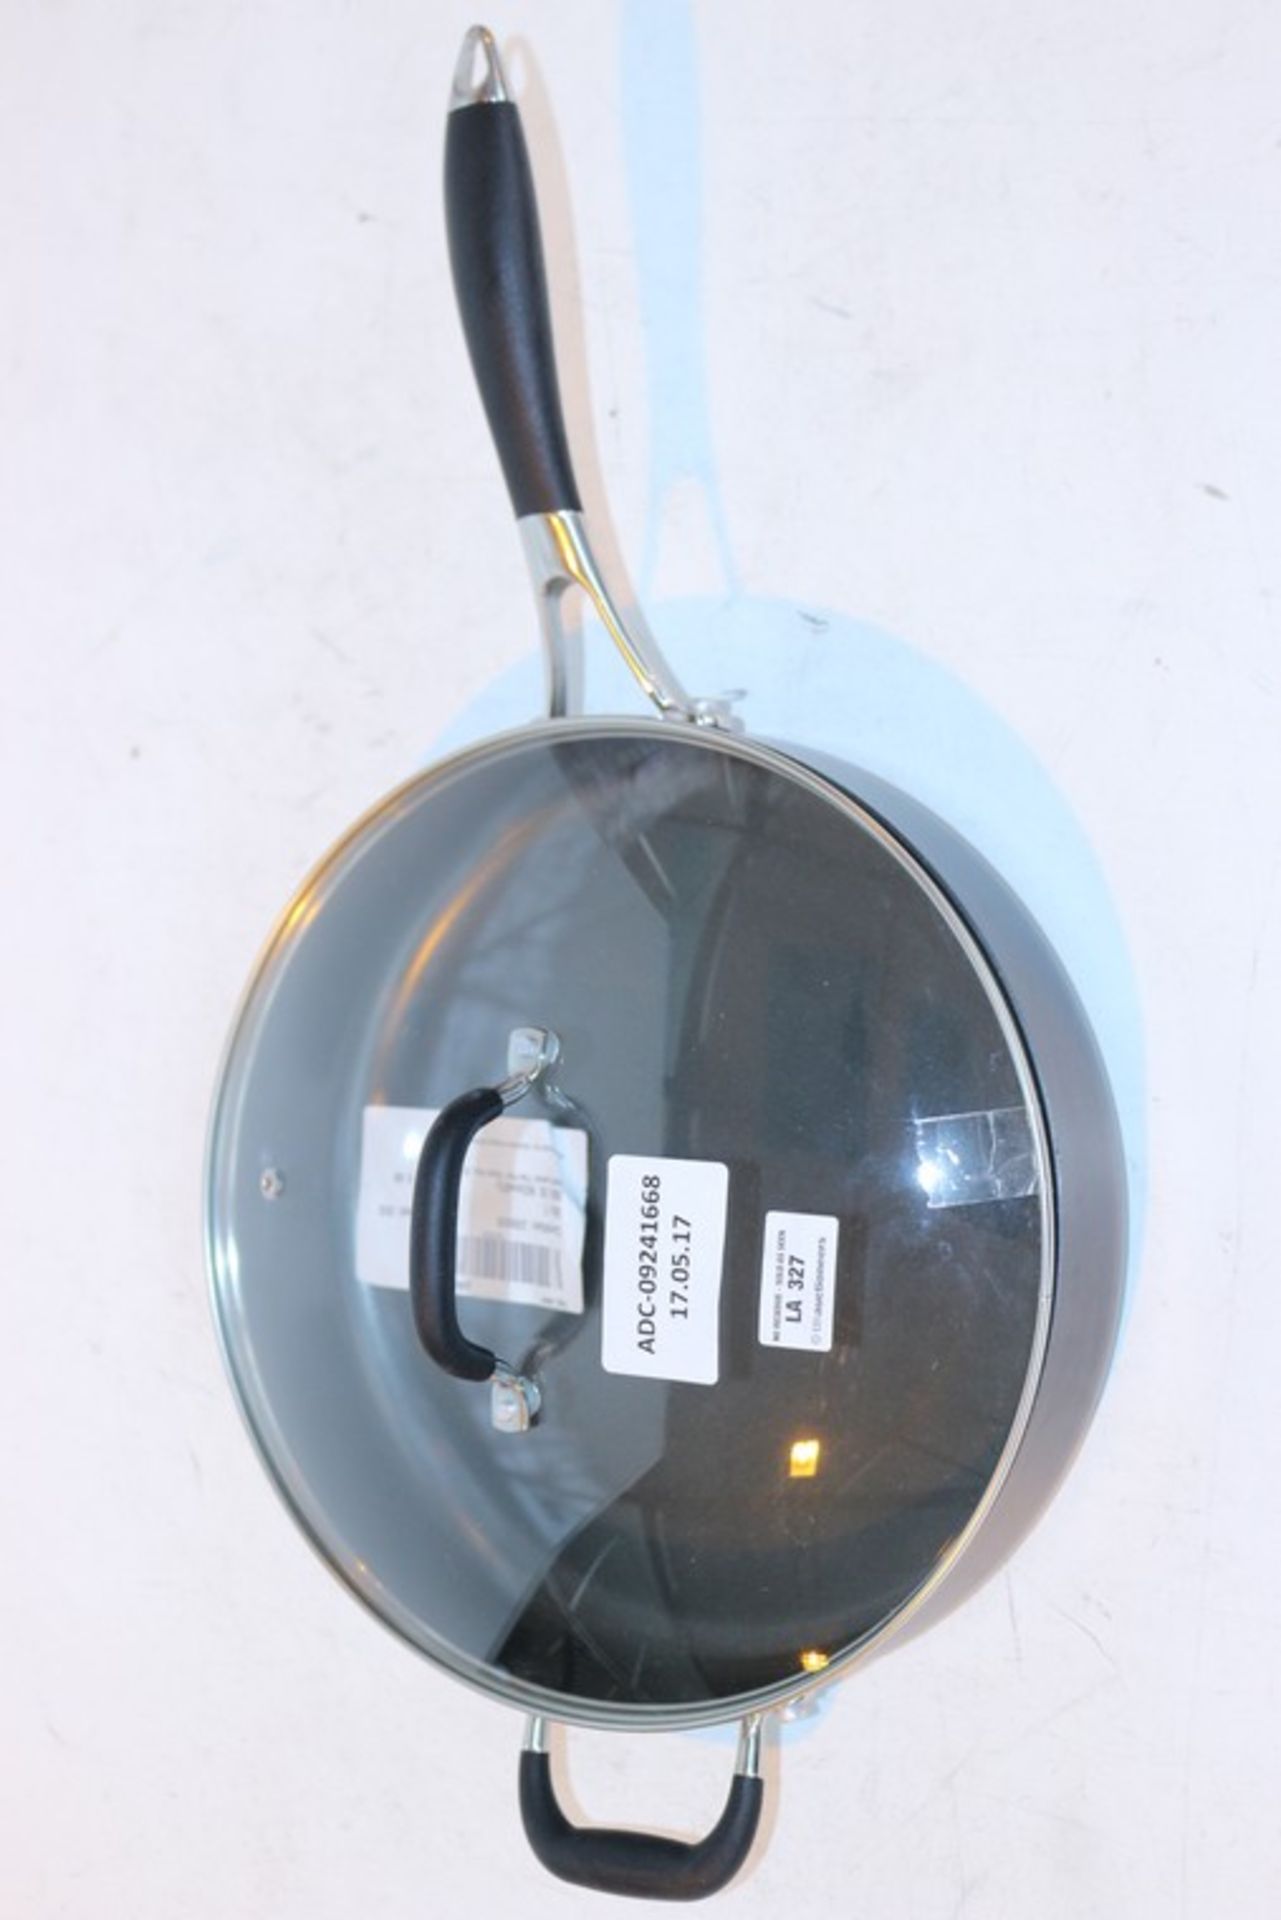 1 x THE PAN SAUCE PAN RRP £48 (17.5.17) *PLEASE NOTE THAT THE BID PRICE IS MULTIPLIED BY THE